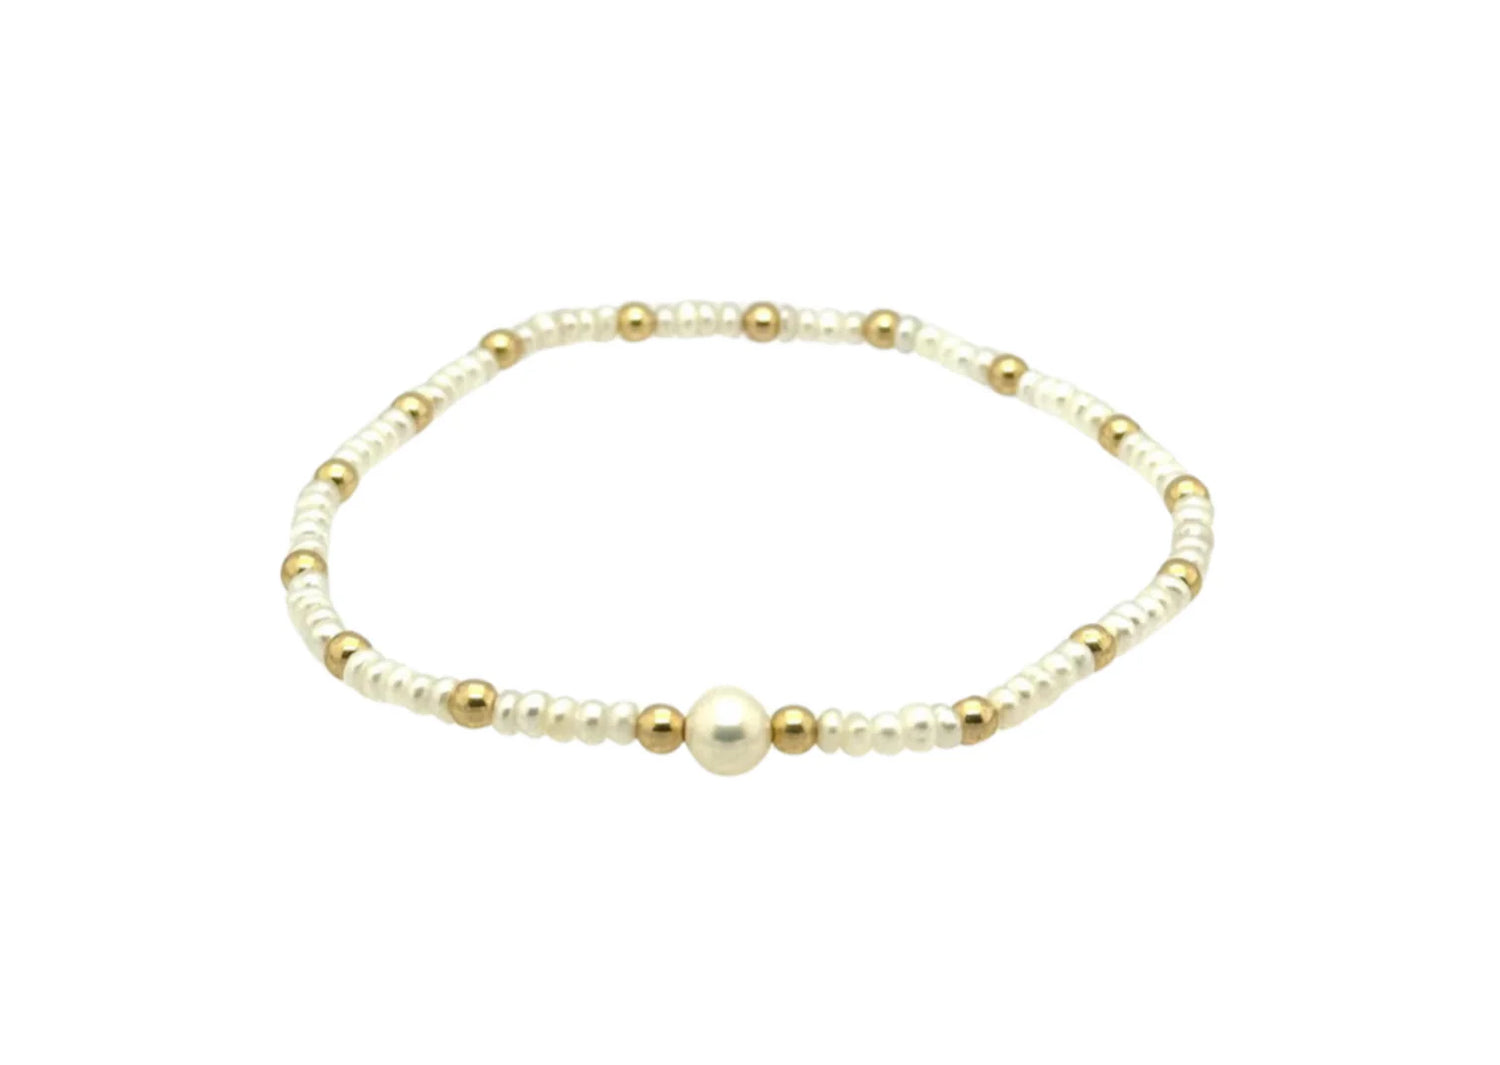 Gold Filled Bracelet With Pearl BALL BEAD MATERIALS:&nbsp;&nbsp;14K GOLD FILLED, STERLING SILVER OR ROSE GOLD BEAD SIZE: 3MM | FRESHWATER PEARLS 5MM STRETCHY LENGTH:&nbsp;6.5" OR 7" CLASP LENGTH:&nbsp;6" + 1.5" EXTENSION HIGH PERFORMANCE ELASTIC MADE IN MIAMI, MADE WITH LOVE